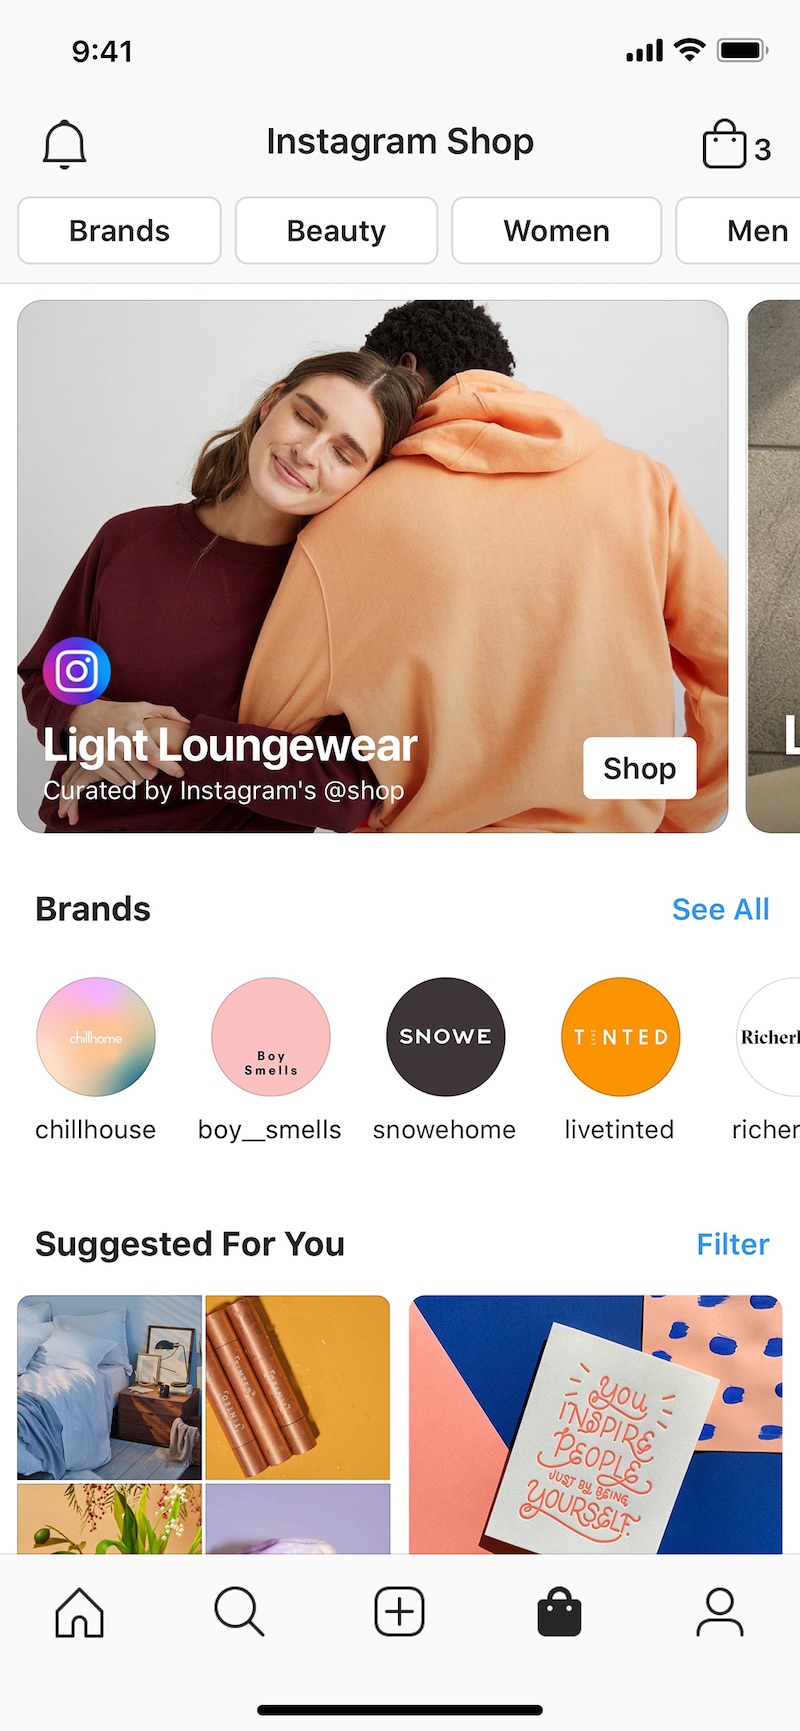 Facebook and Instagram launch digital Shop to provide business relief 